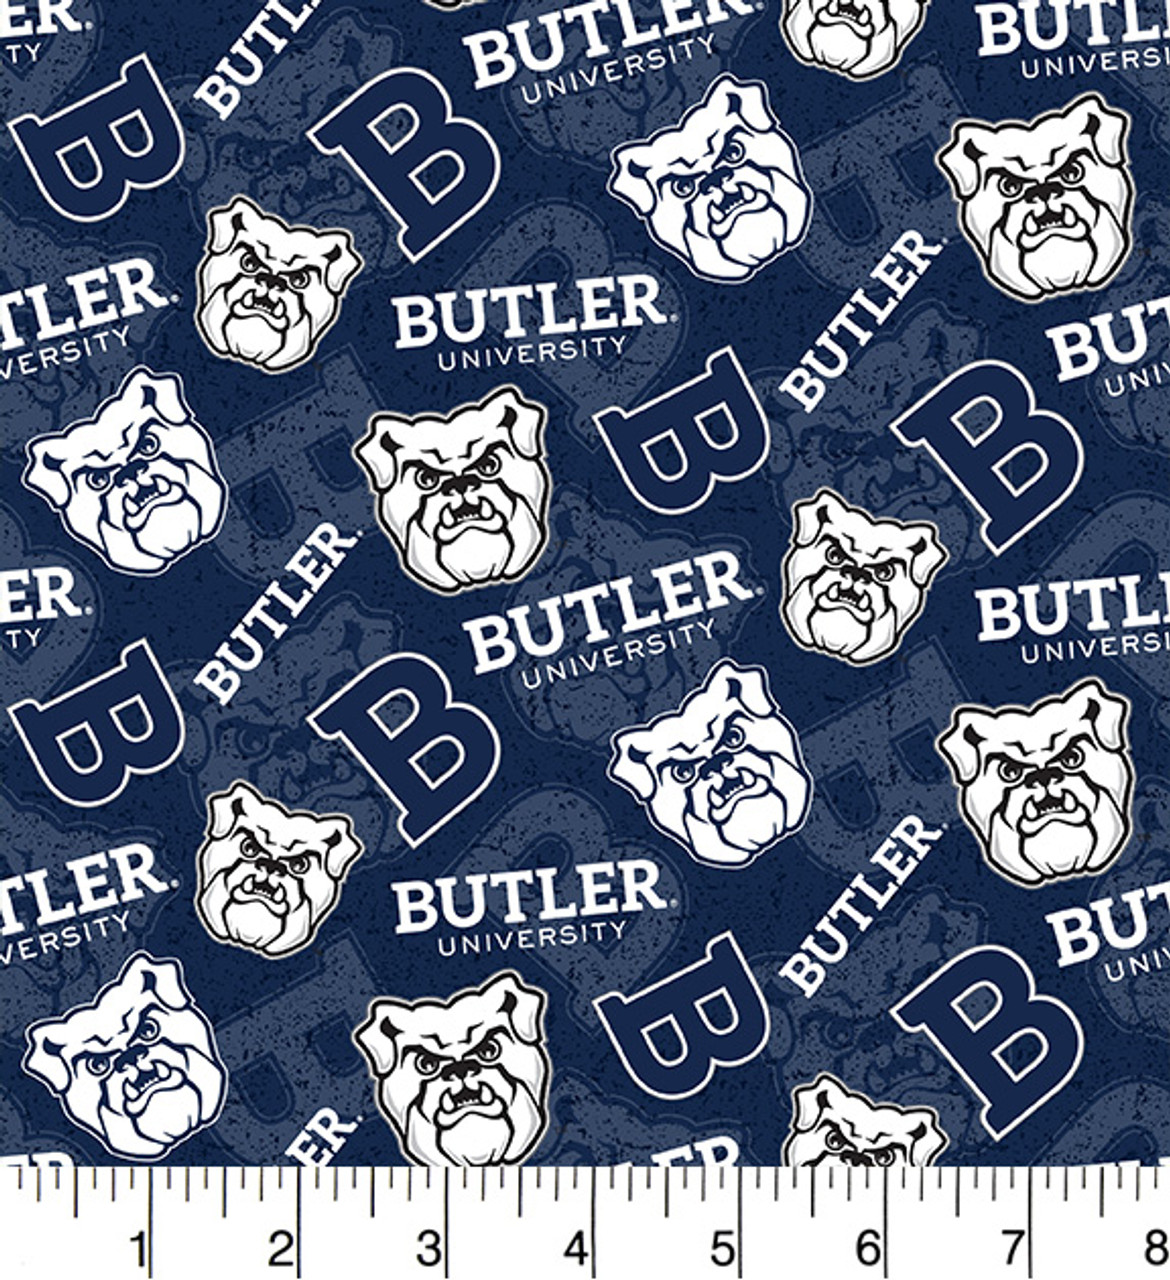 Butler University Bulldogs Cotton Fabric with Tone On Tone Print and Matching Solid Cotton Fabrics